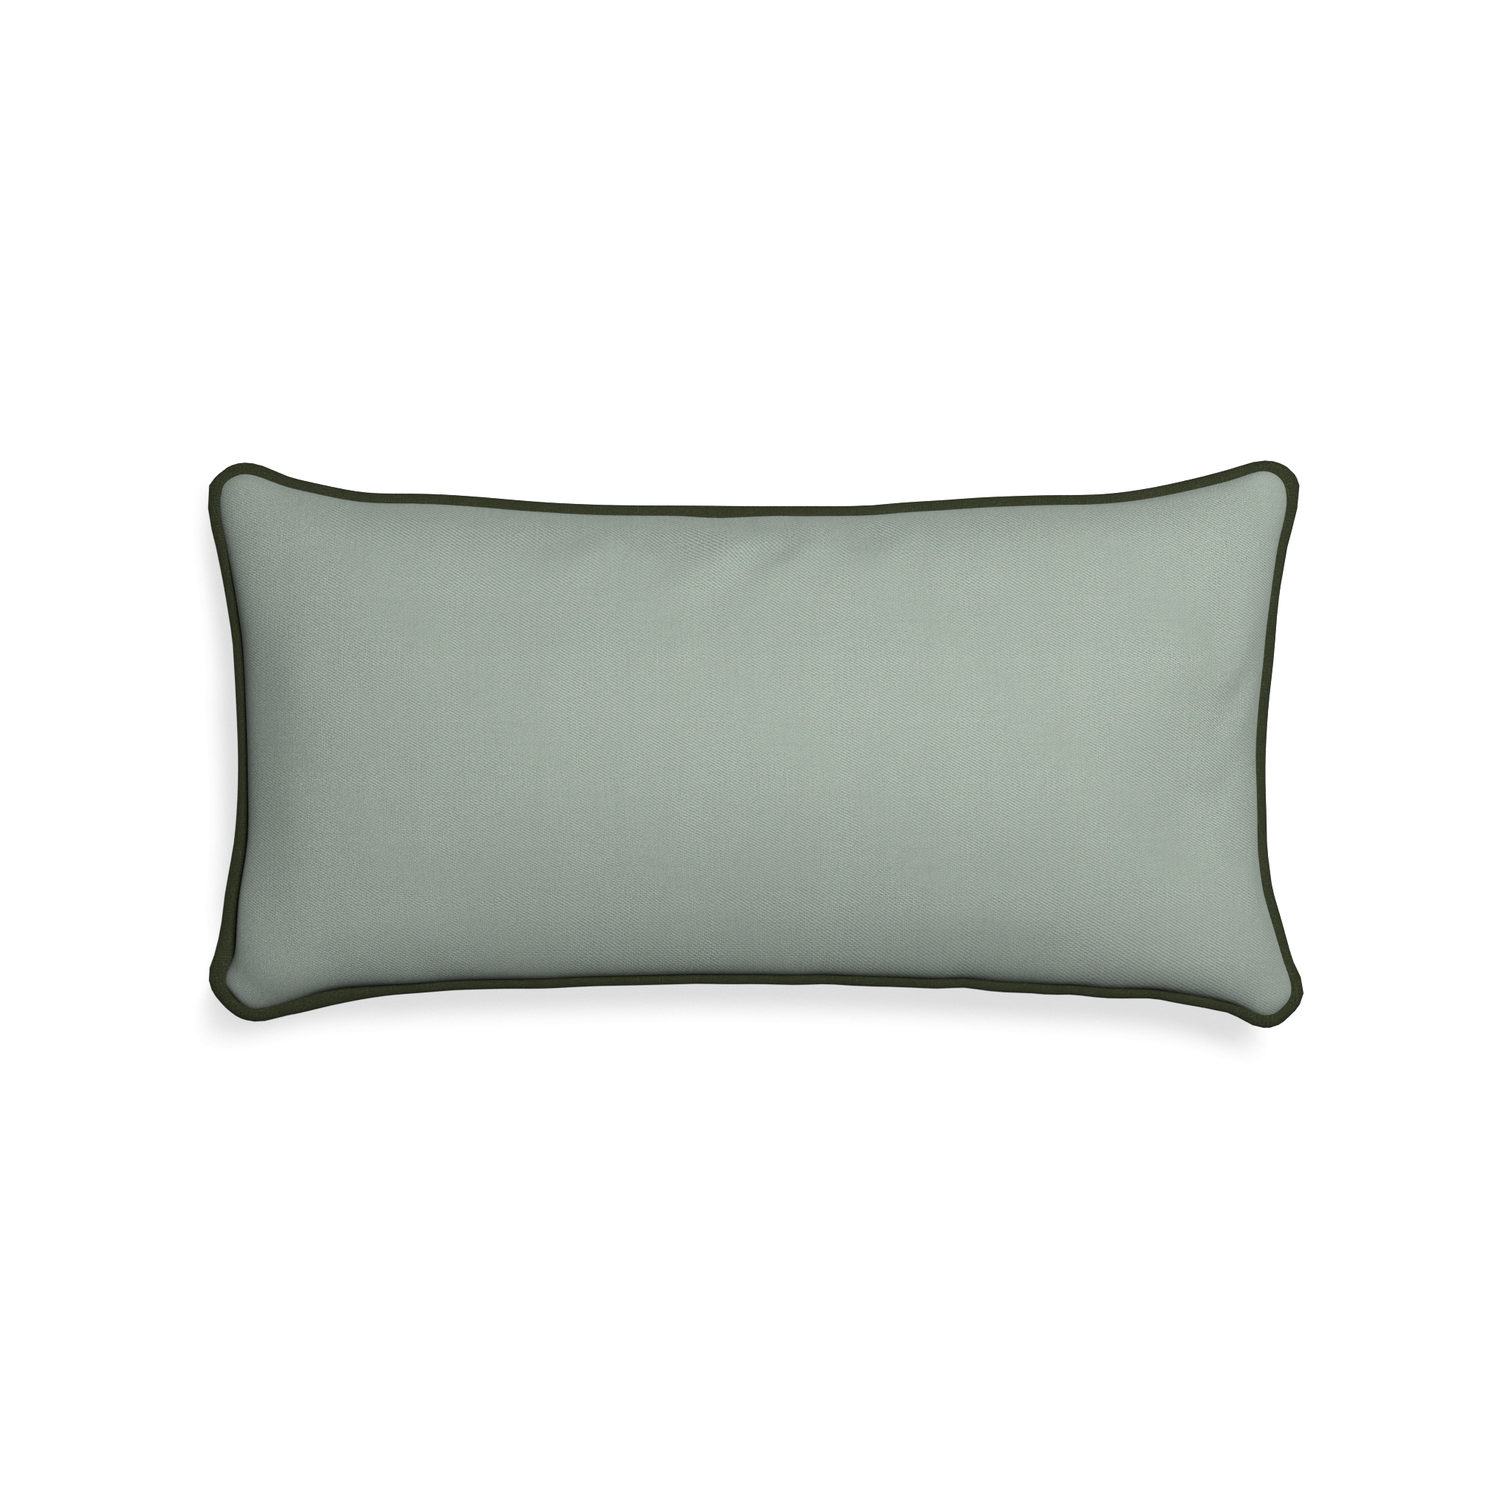 Midi-lumbar sage custom sage green cottonpillow with f piping on white background